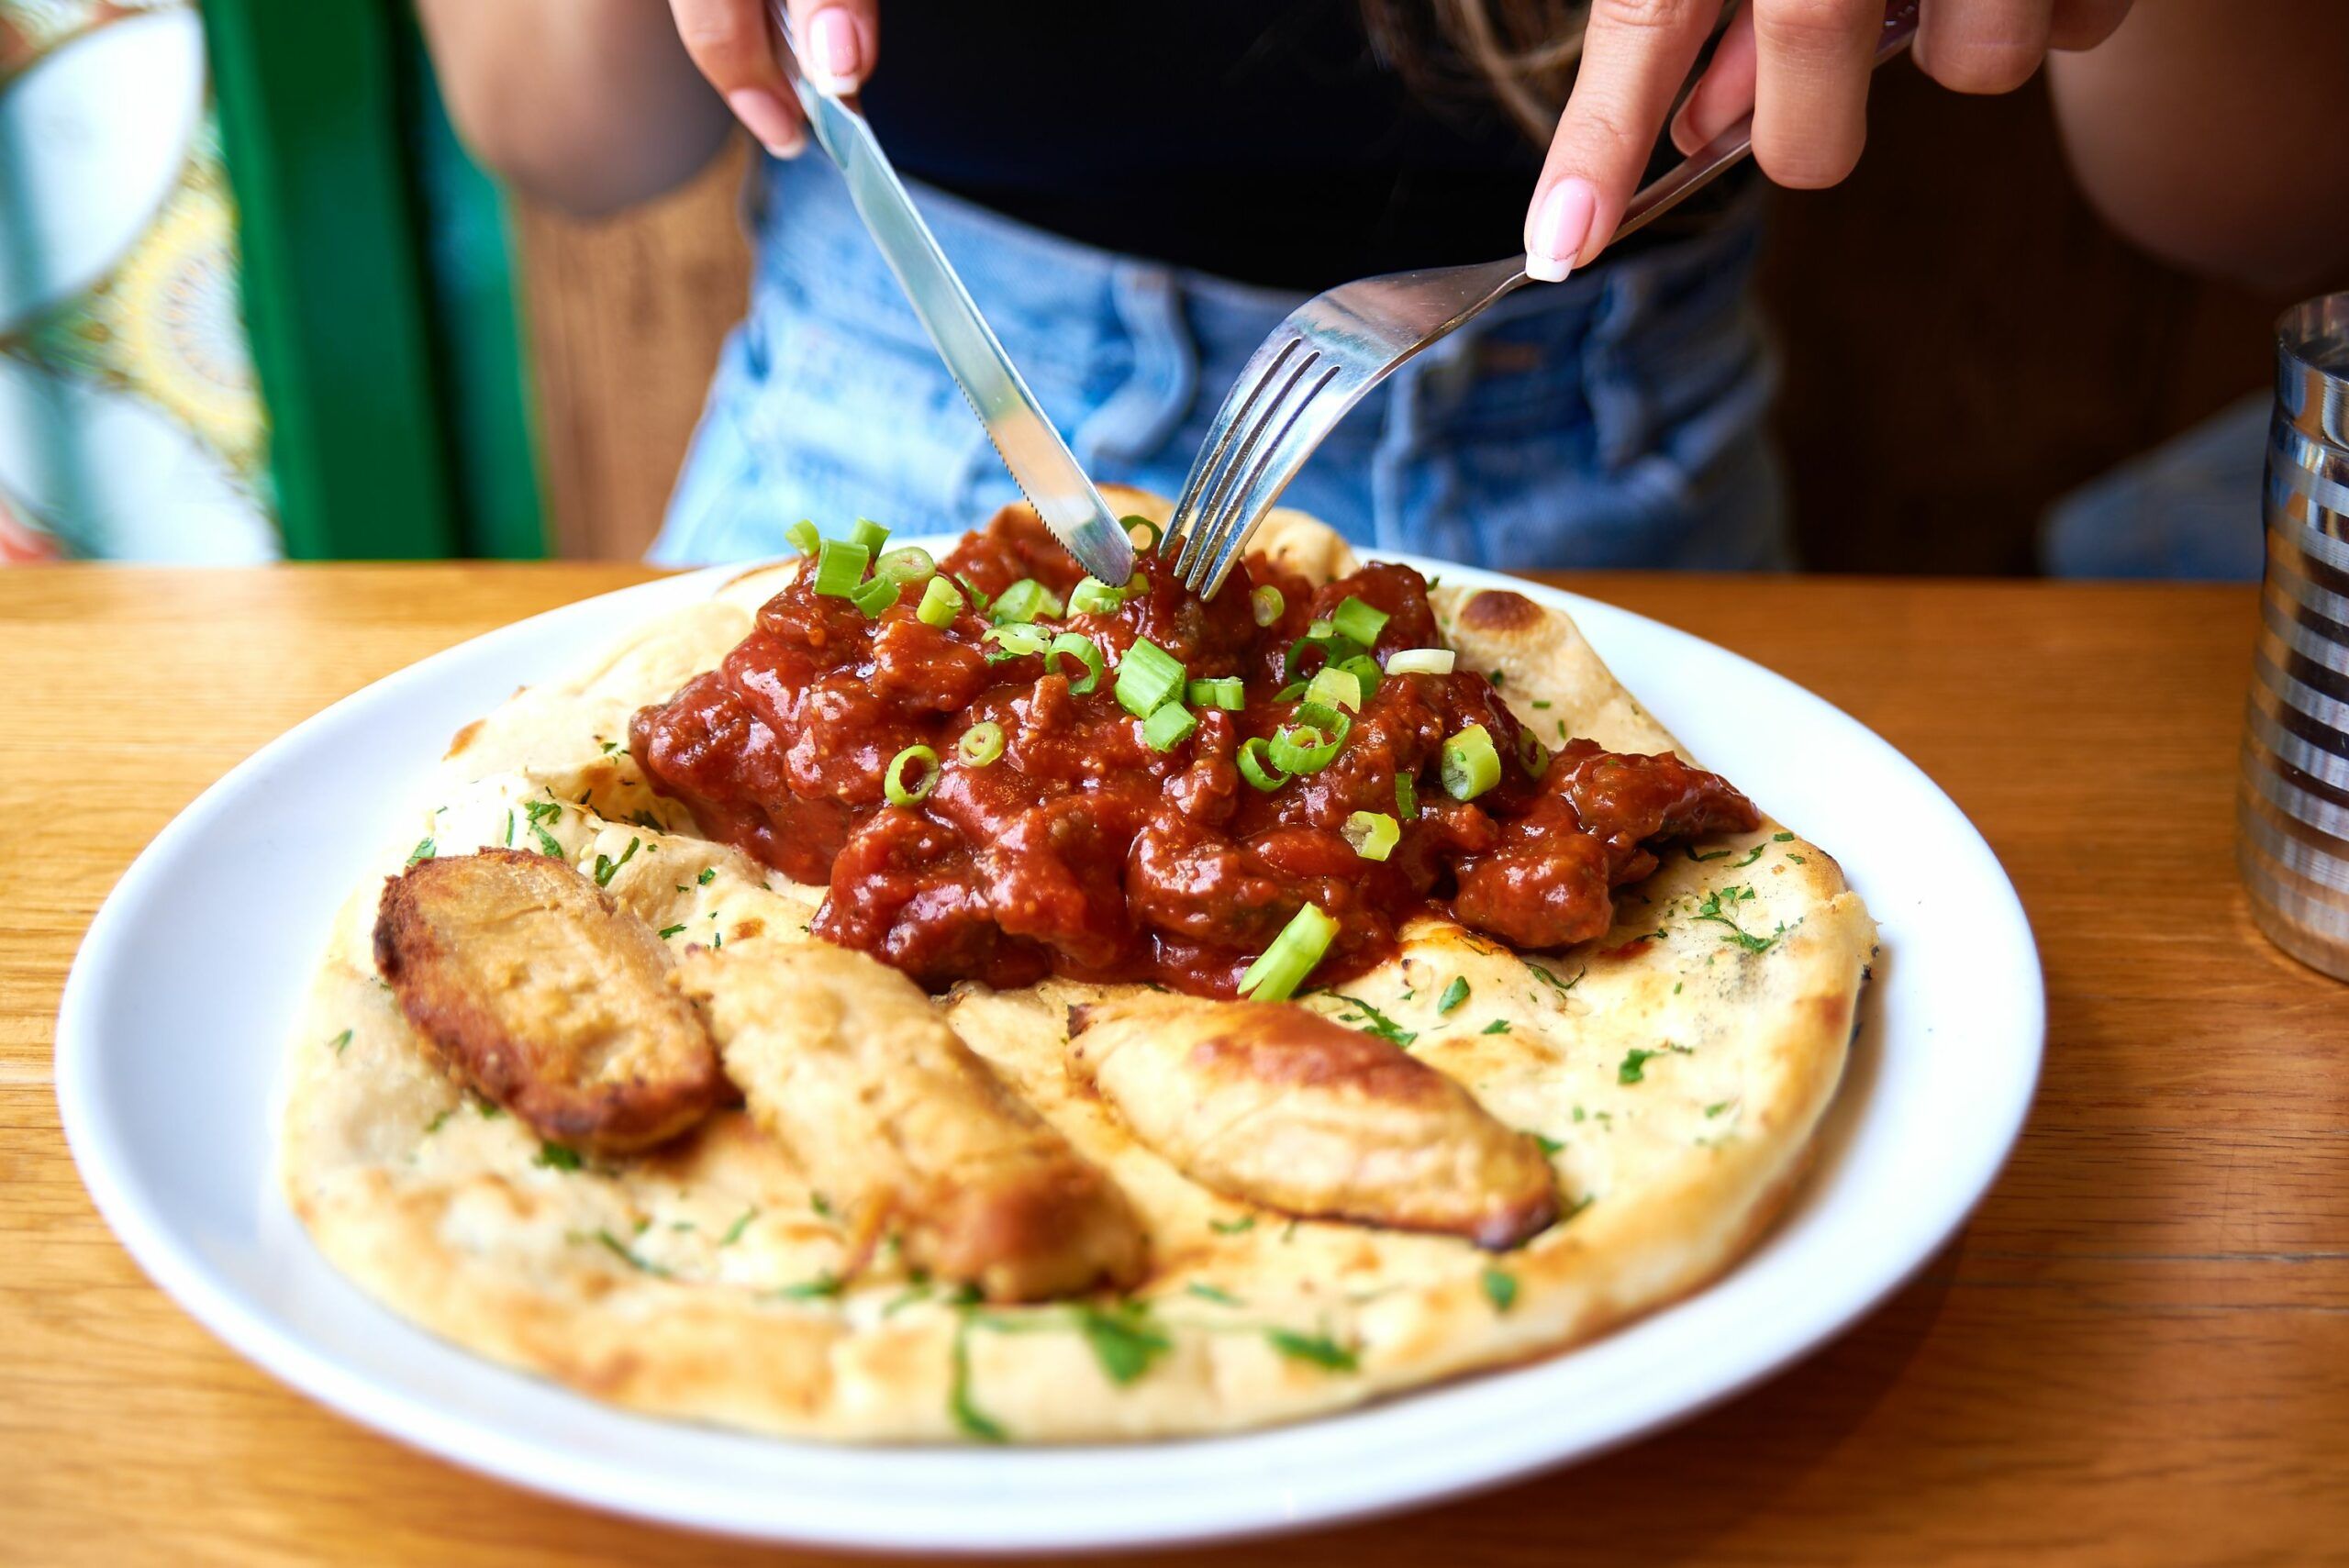 Mouthwatering new brunch menu at the Curry Leaf Cafe. Naan with vegan sausage and mushroom in the red sauce